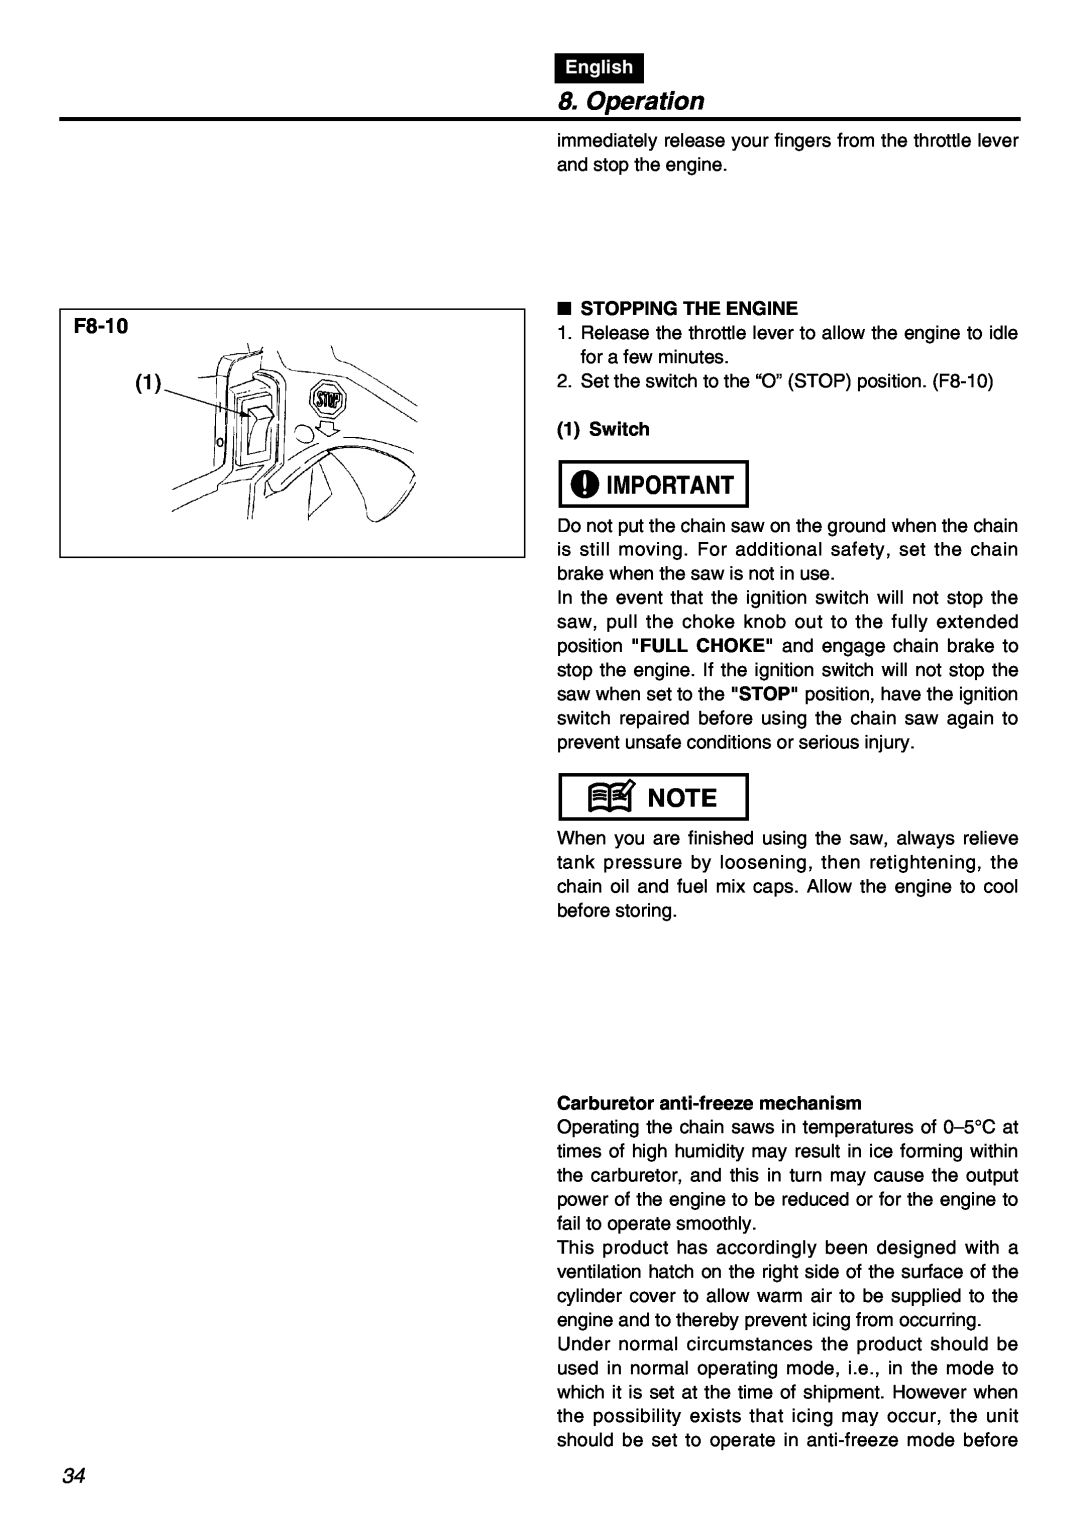 RedMax GZ400 manual F8-10, Operation, English, Stopping The Engine, Switch, Carburetor anti-freeze mechanism 